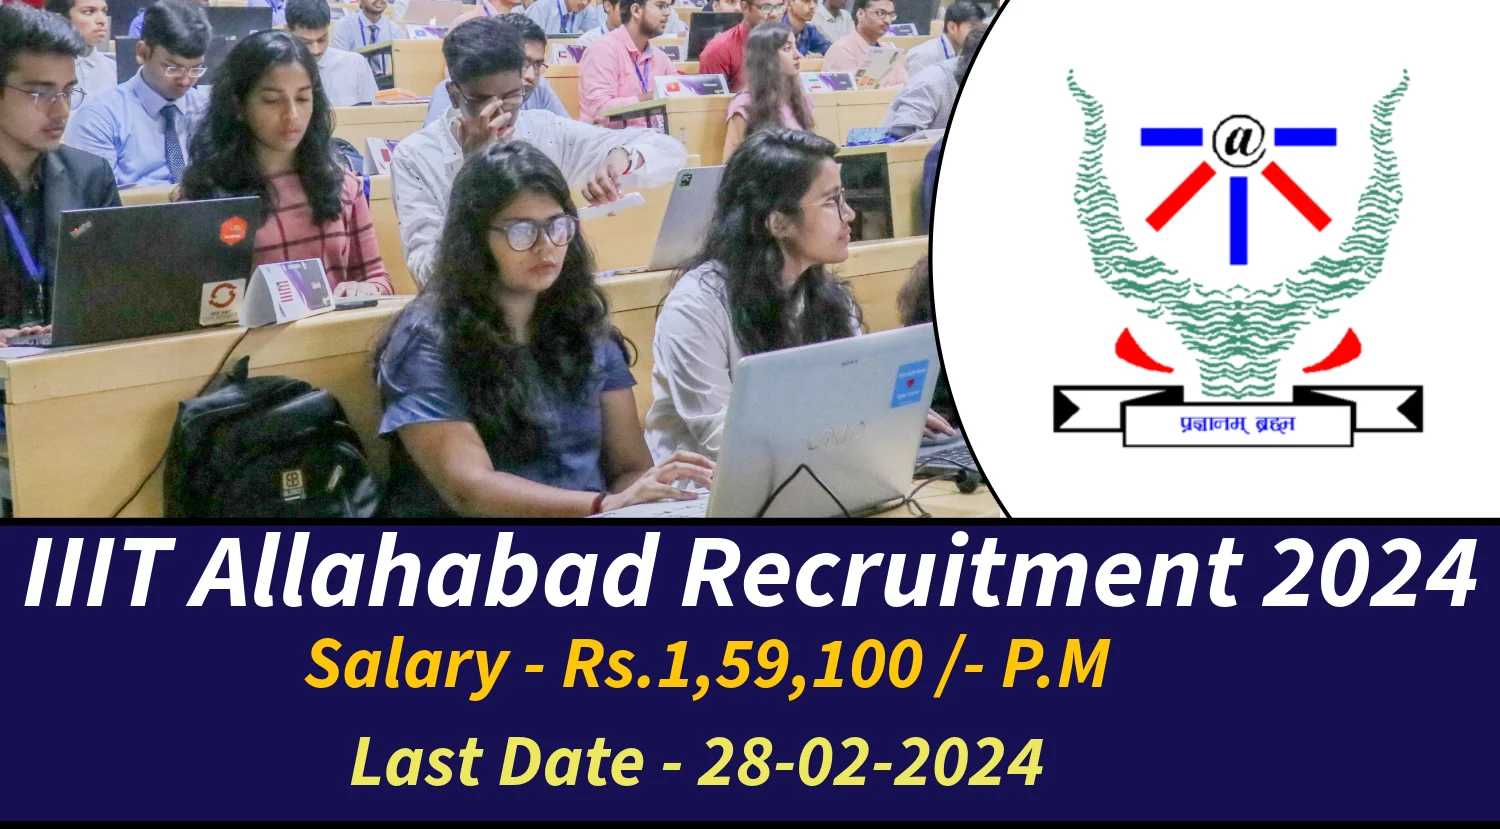 IIIT Allahabad Recruitment 2024 for Various Faculty Posts